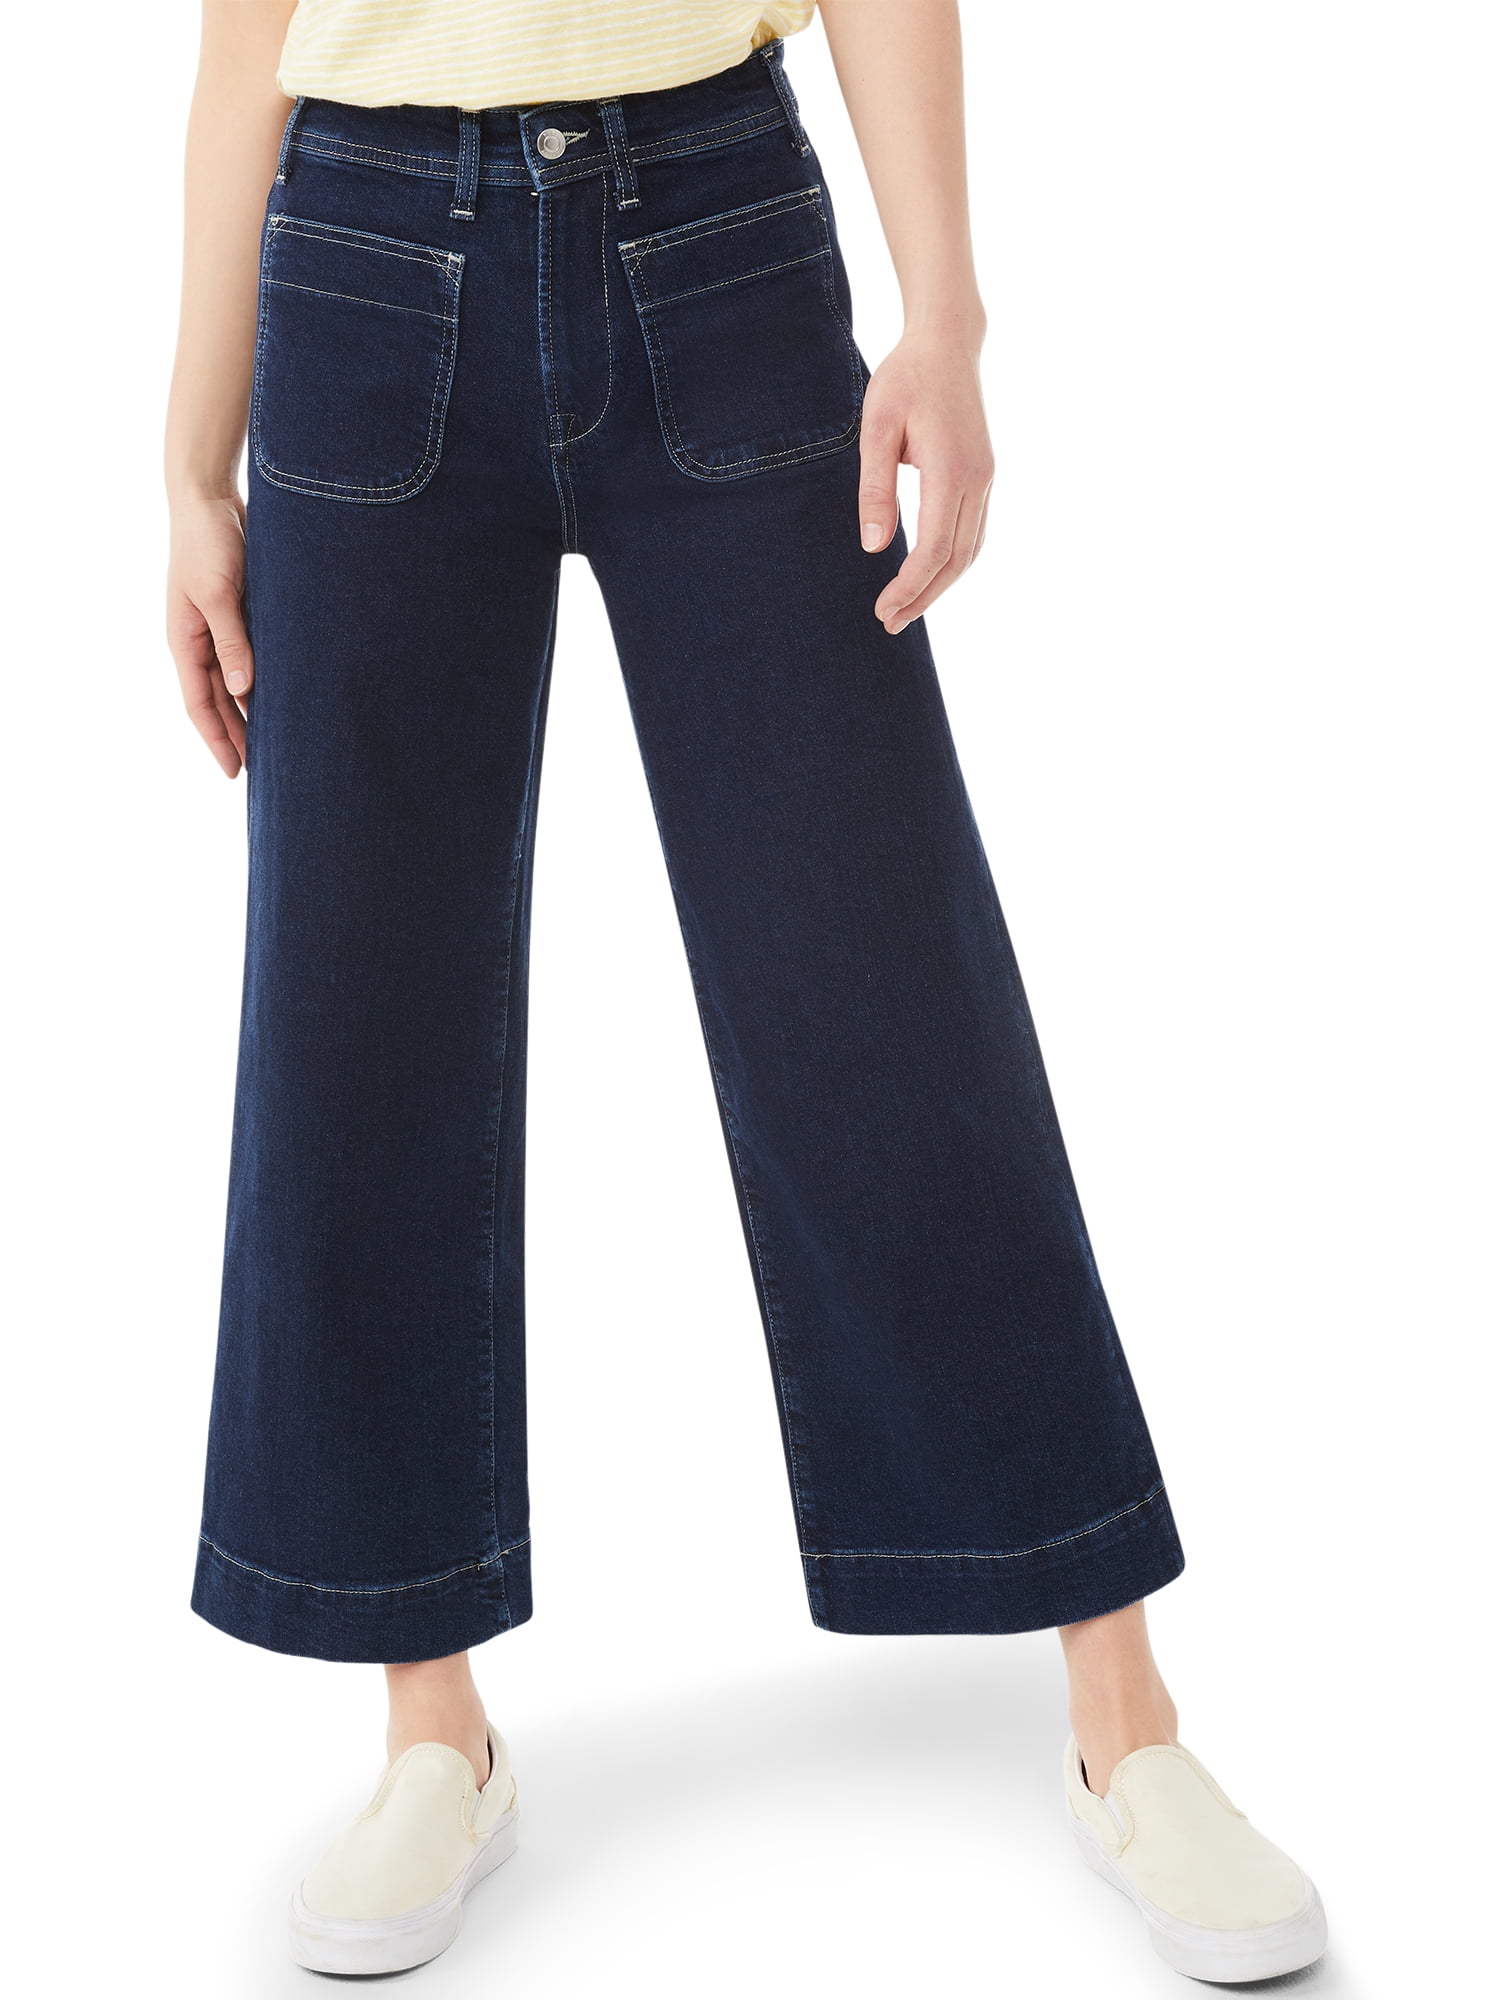 Free Assembly - Free Assembly Women's Retro Flare Jeans - Walmart.com ...